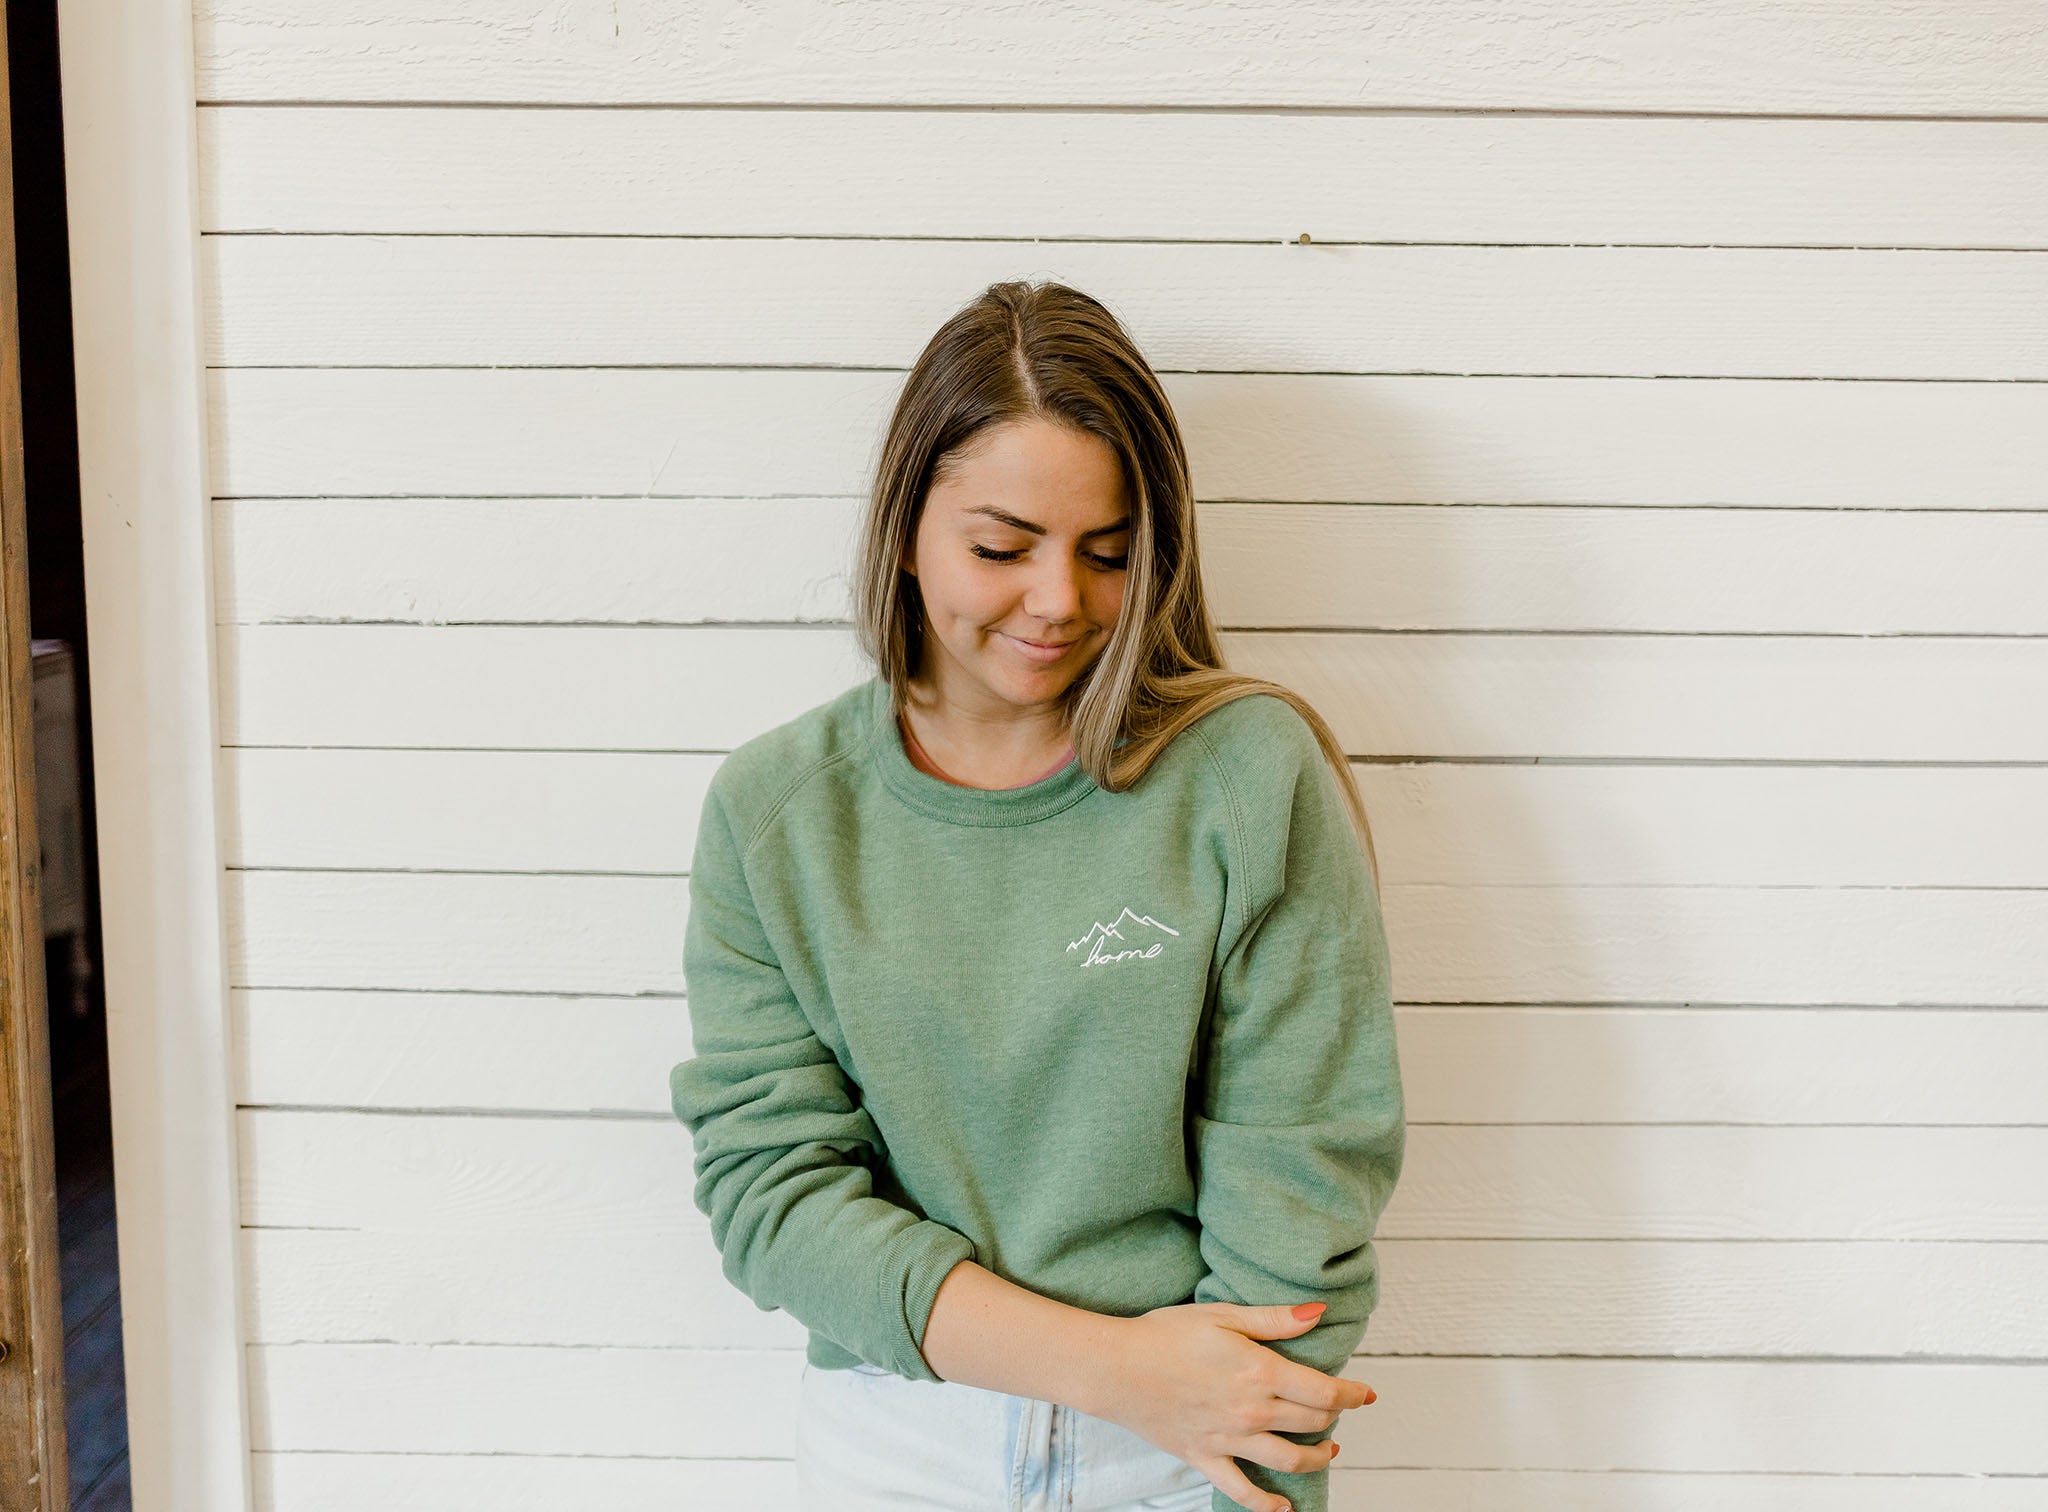 Home Embroidered Crew Neck - Shop Back Home